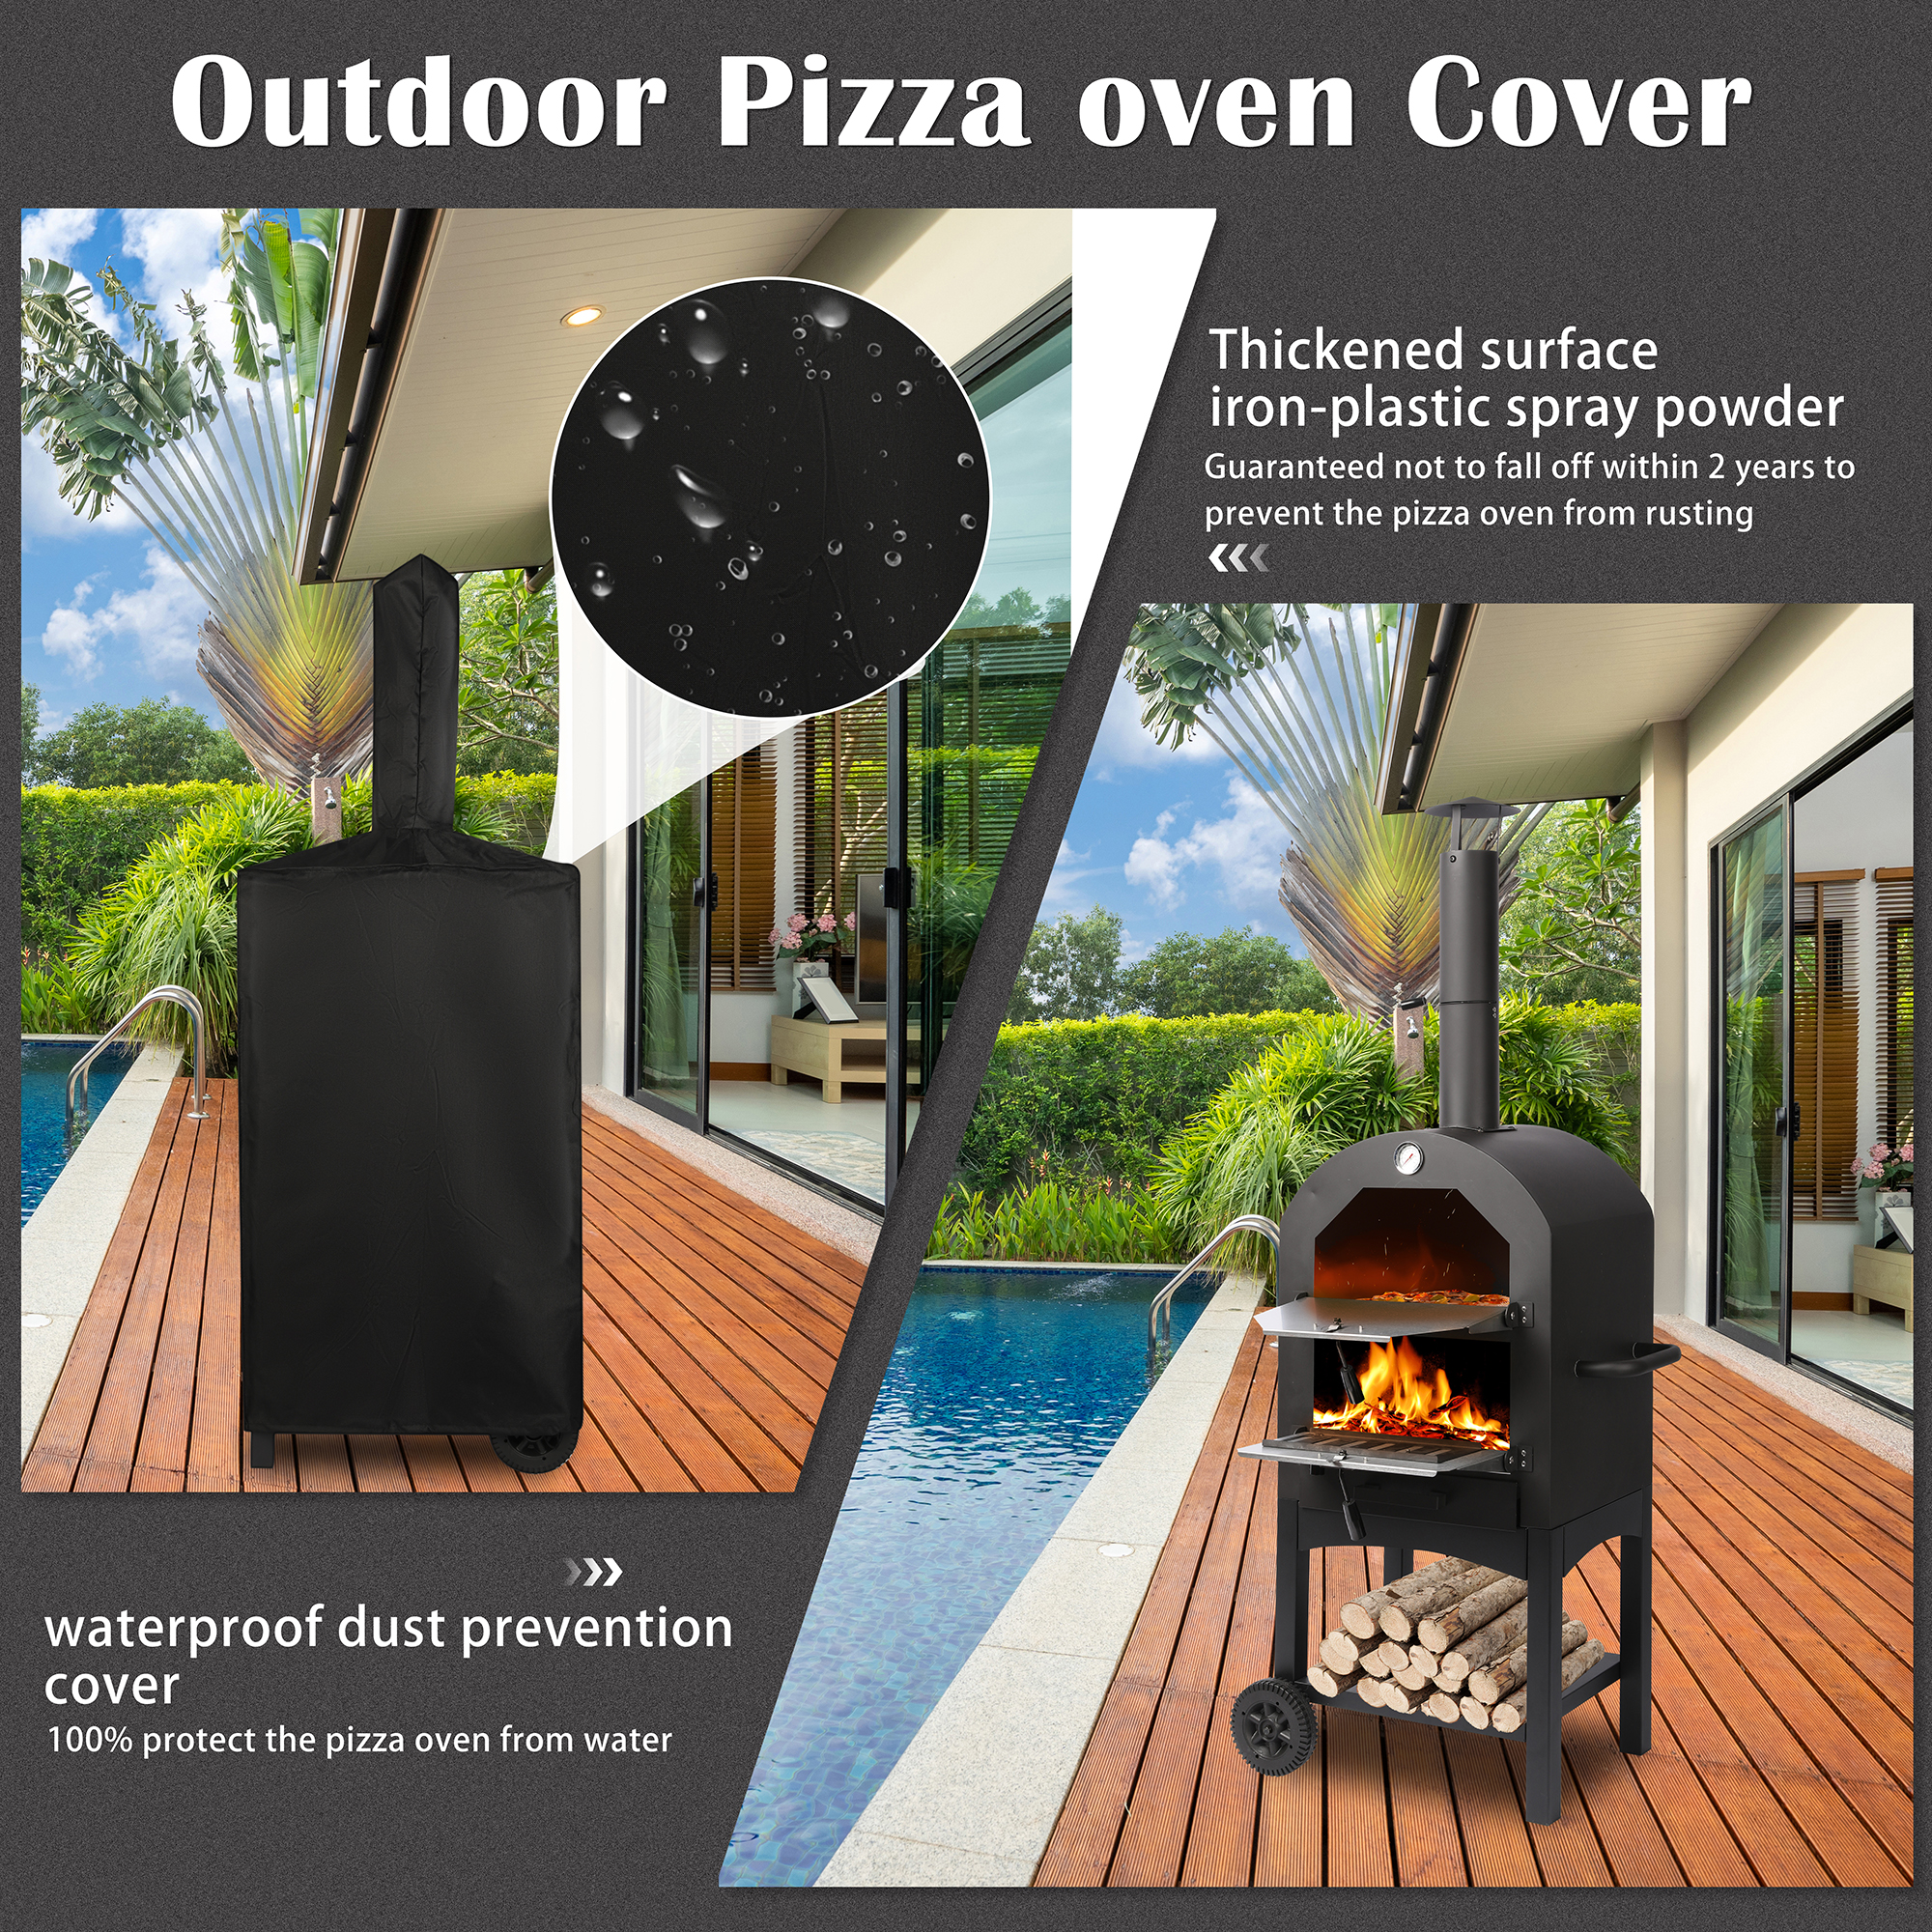 Tolead Outdoor Wood Burning Pizza Oven with Waterproof Cover, Black - image 3 of 11